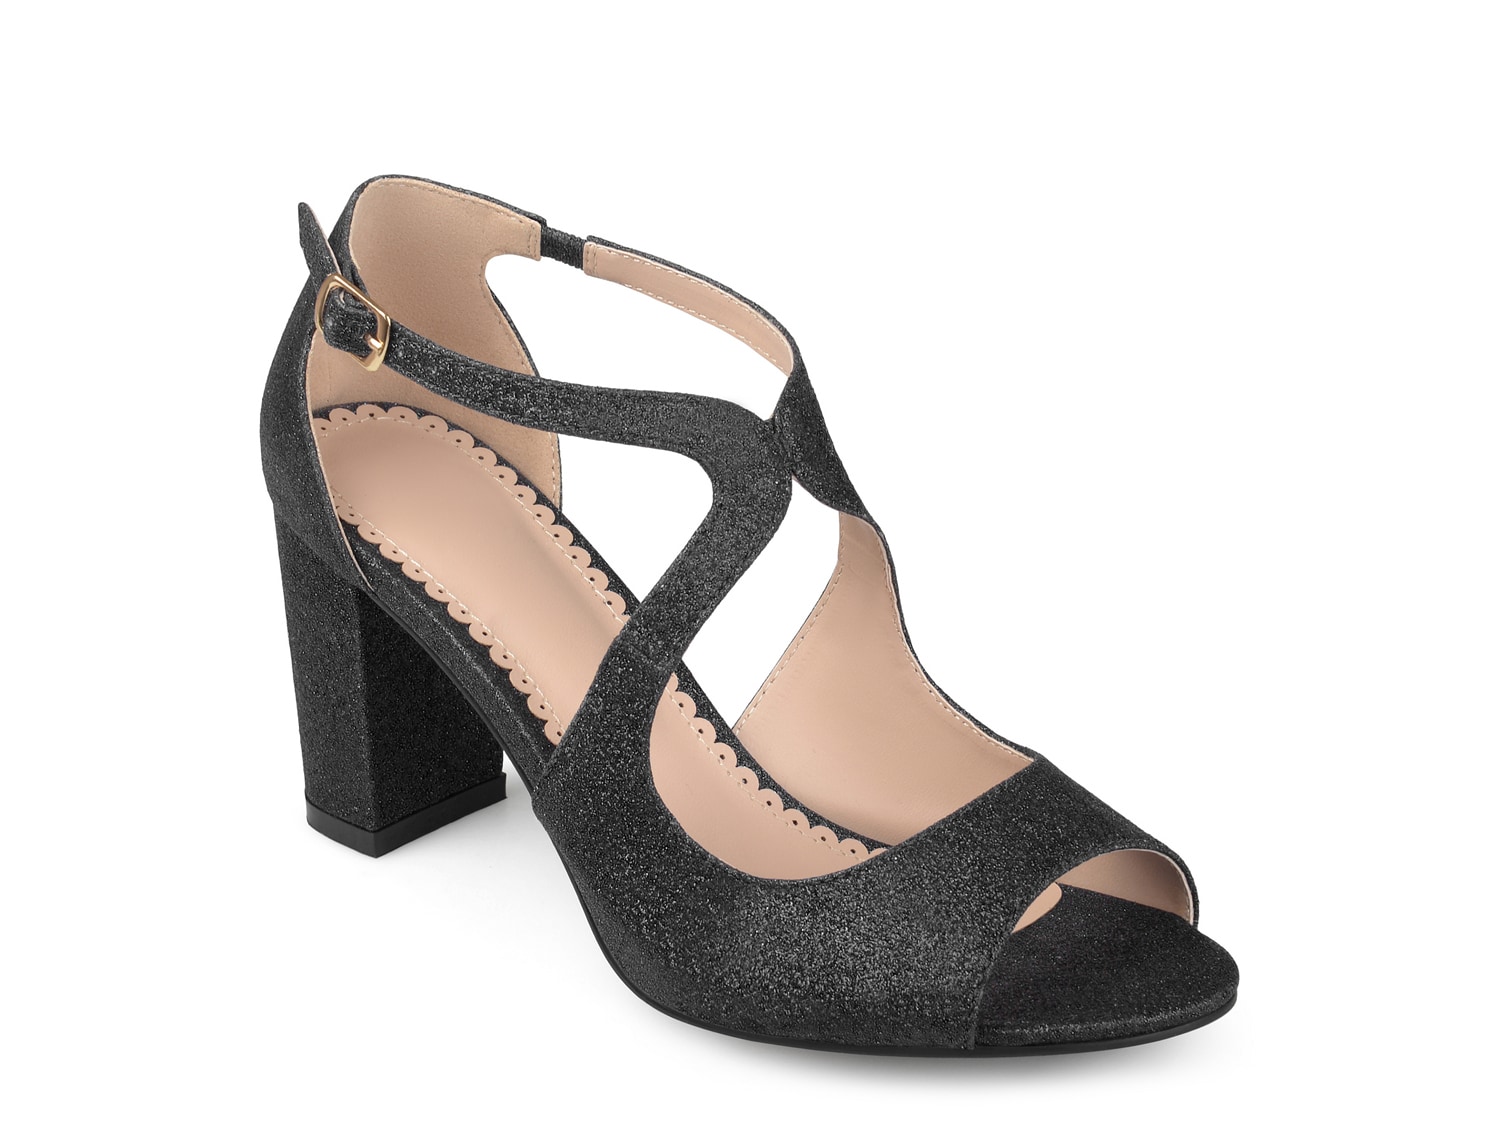 black strappy shoes 3 inch heel | DSW